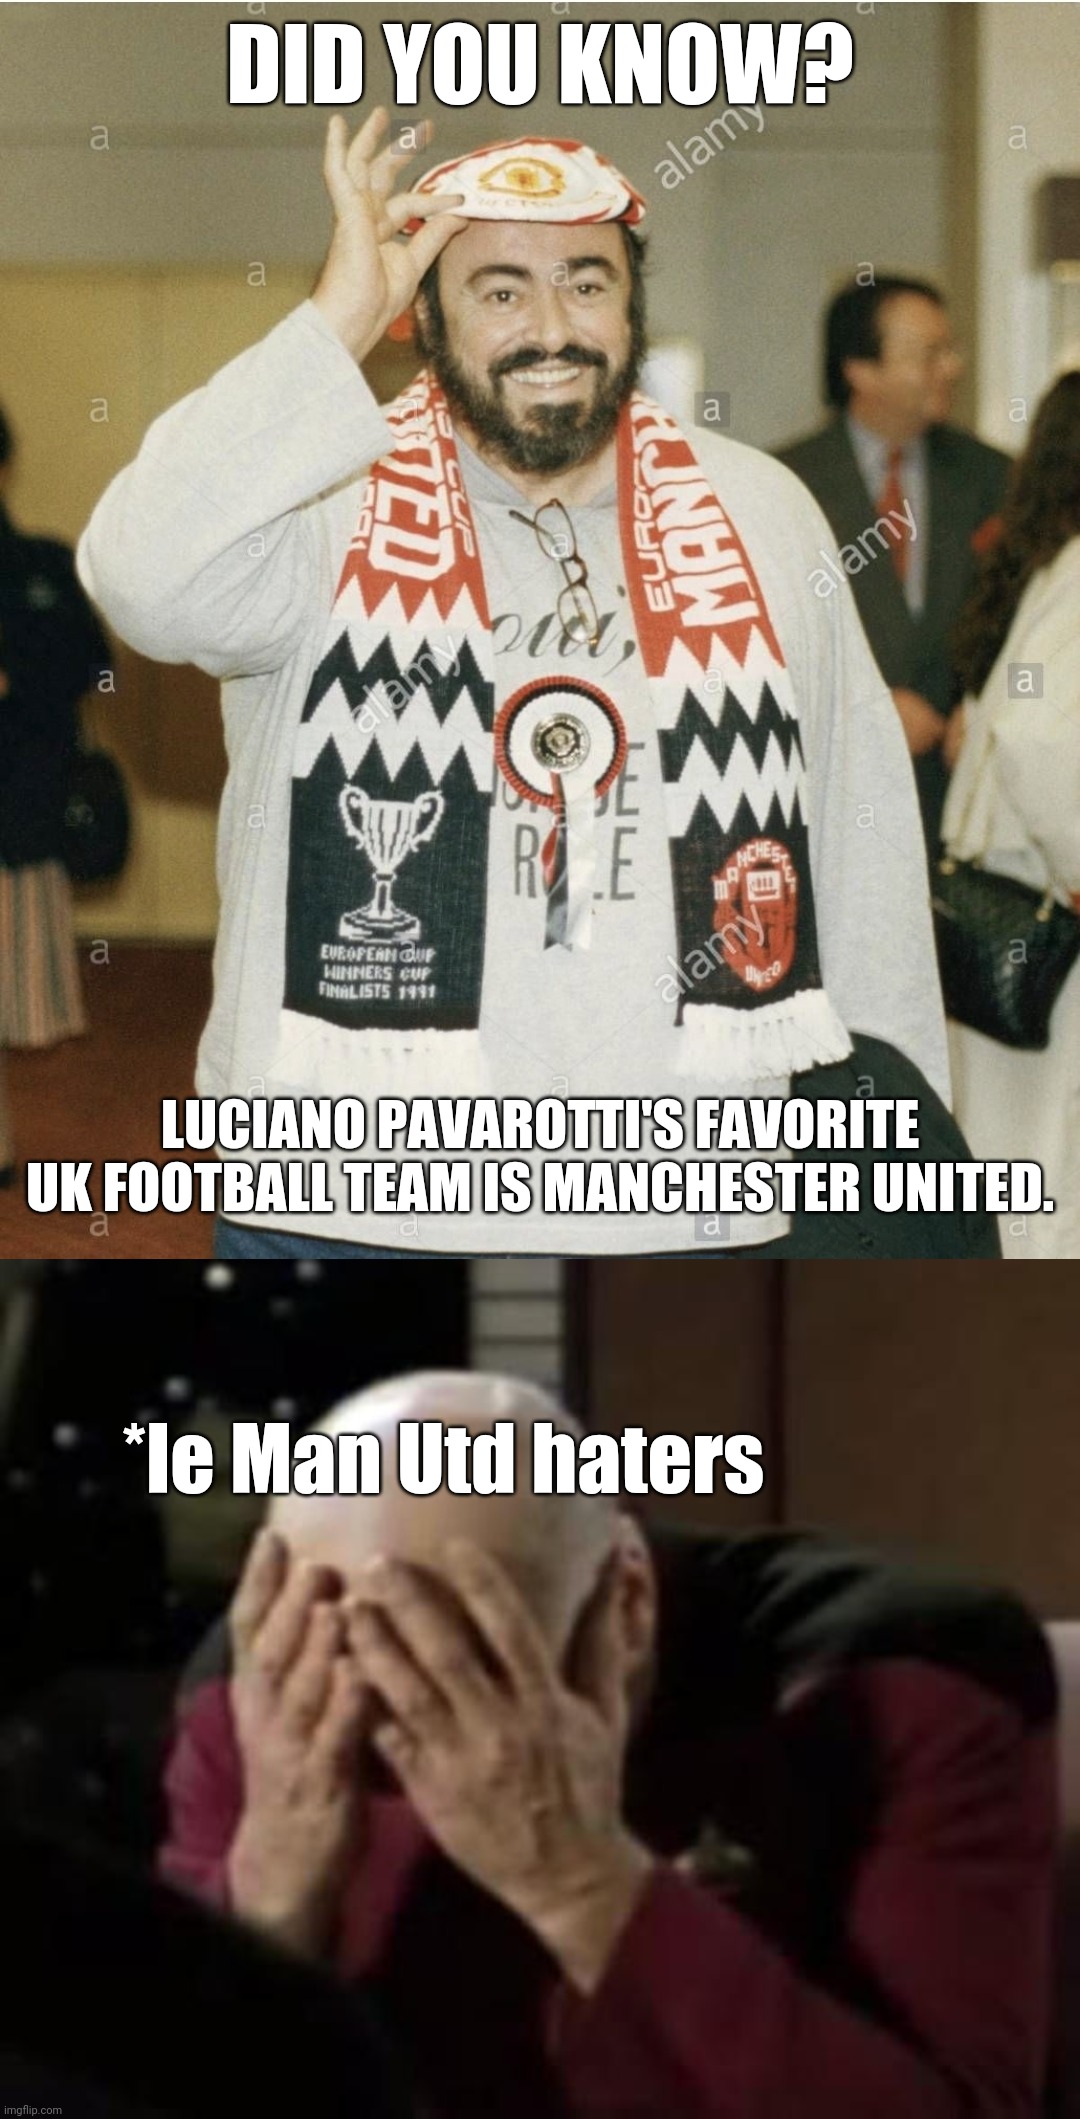 Luciano Pavarotti was a Manchester United fan | DID YOU KNOW? LUCIANO PAVAROTTI'S FAVORITE UK FOOTBALL TEAM IS MANCHESTER UNITED. *le Man Utd haters | image tagged in captain picard double facepalm,pavarotti,manchester united,memes | made w/ Imgflip meme maker